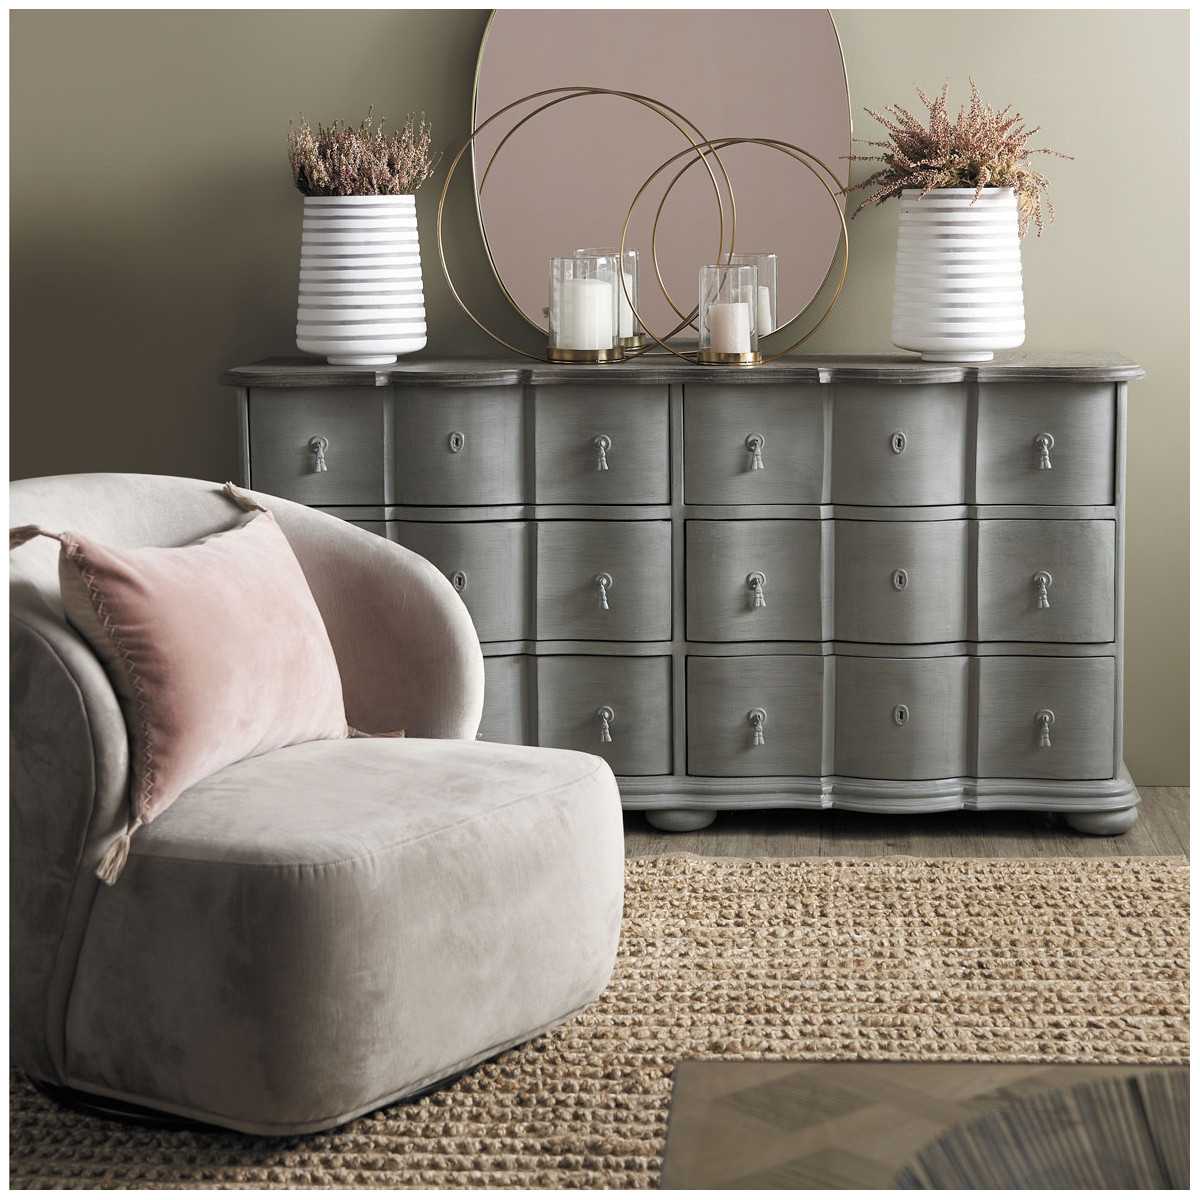 Category CONVENIENT - Bougie personnalisée : End of sofa CELINE , Gaby stone chest of drawers , Commode GABRIELLE , Carlotta ...